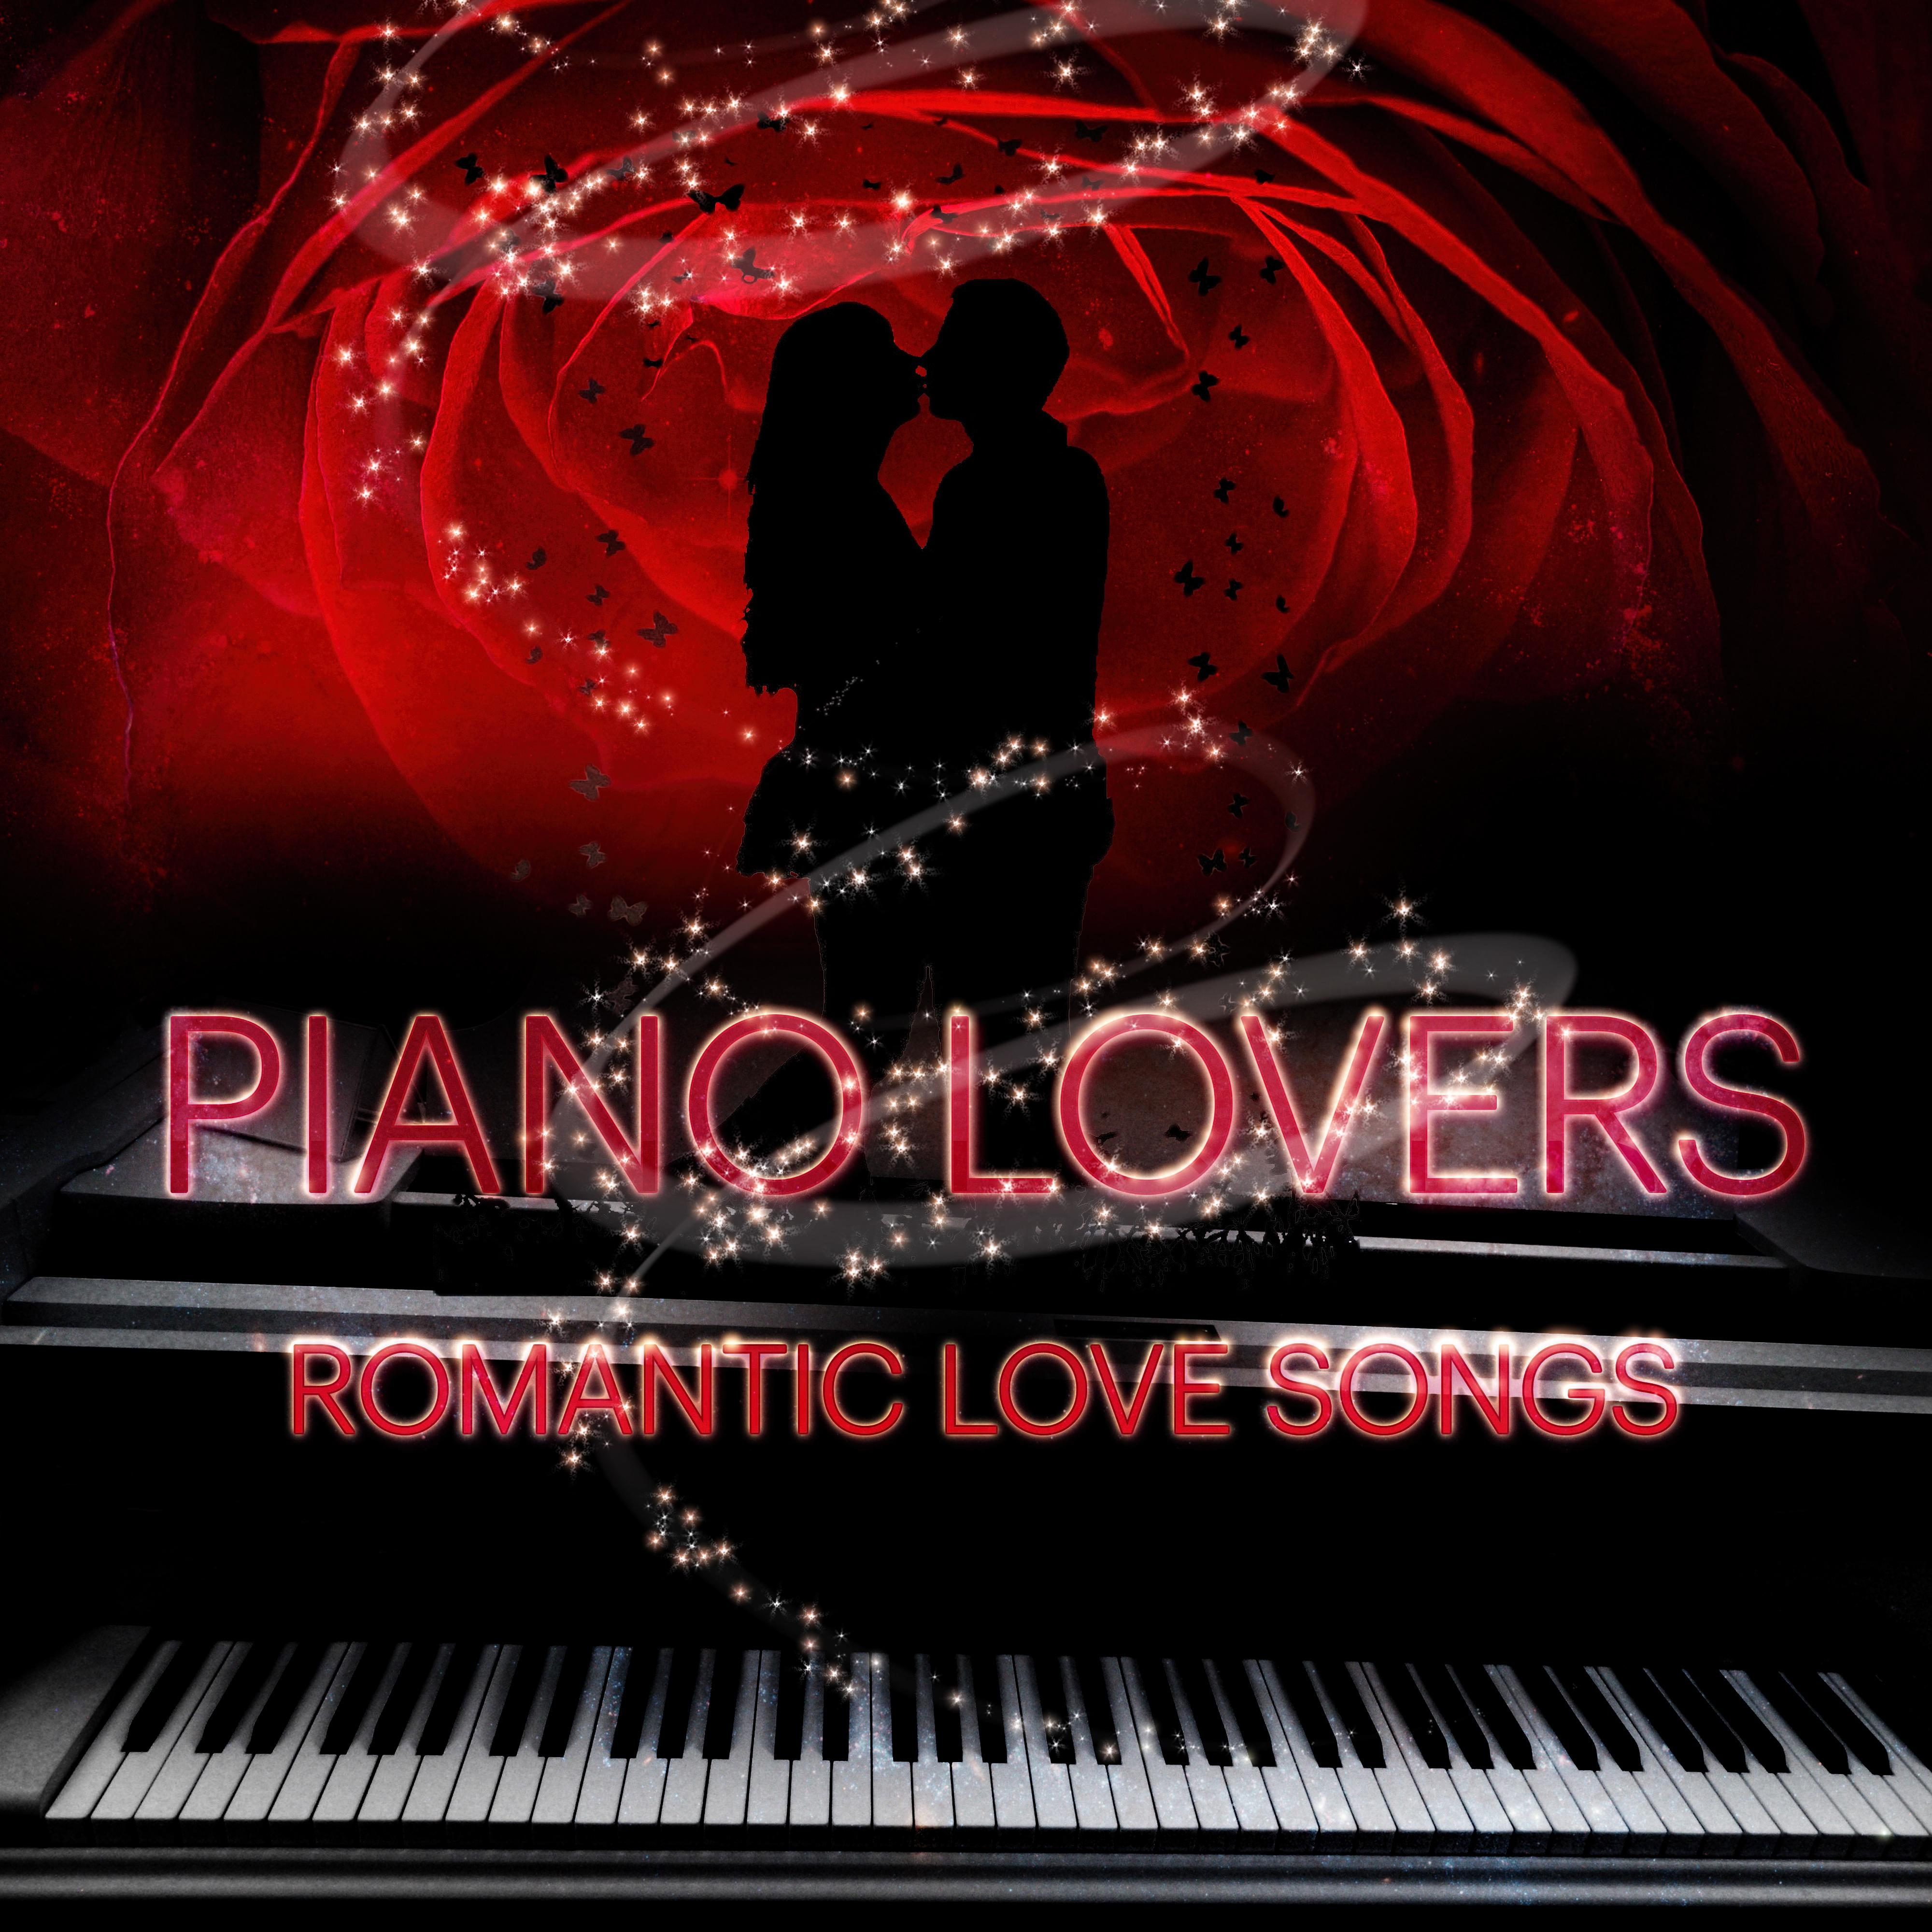 Romantic Love Songs - Night Lovers, Sleep Music Relaxation, Music Shades for Romantic Night & Special Moments Intimate Love